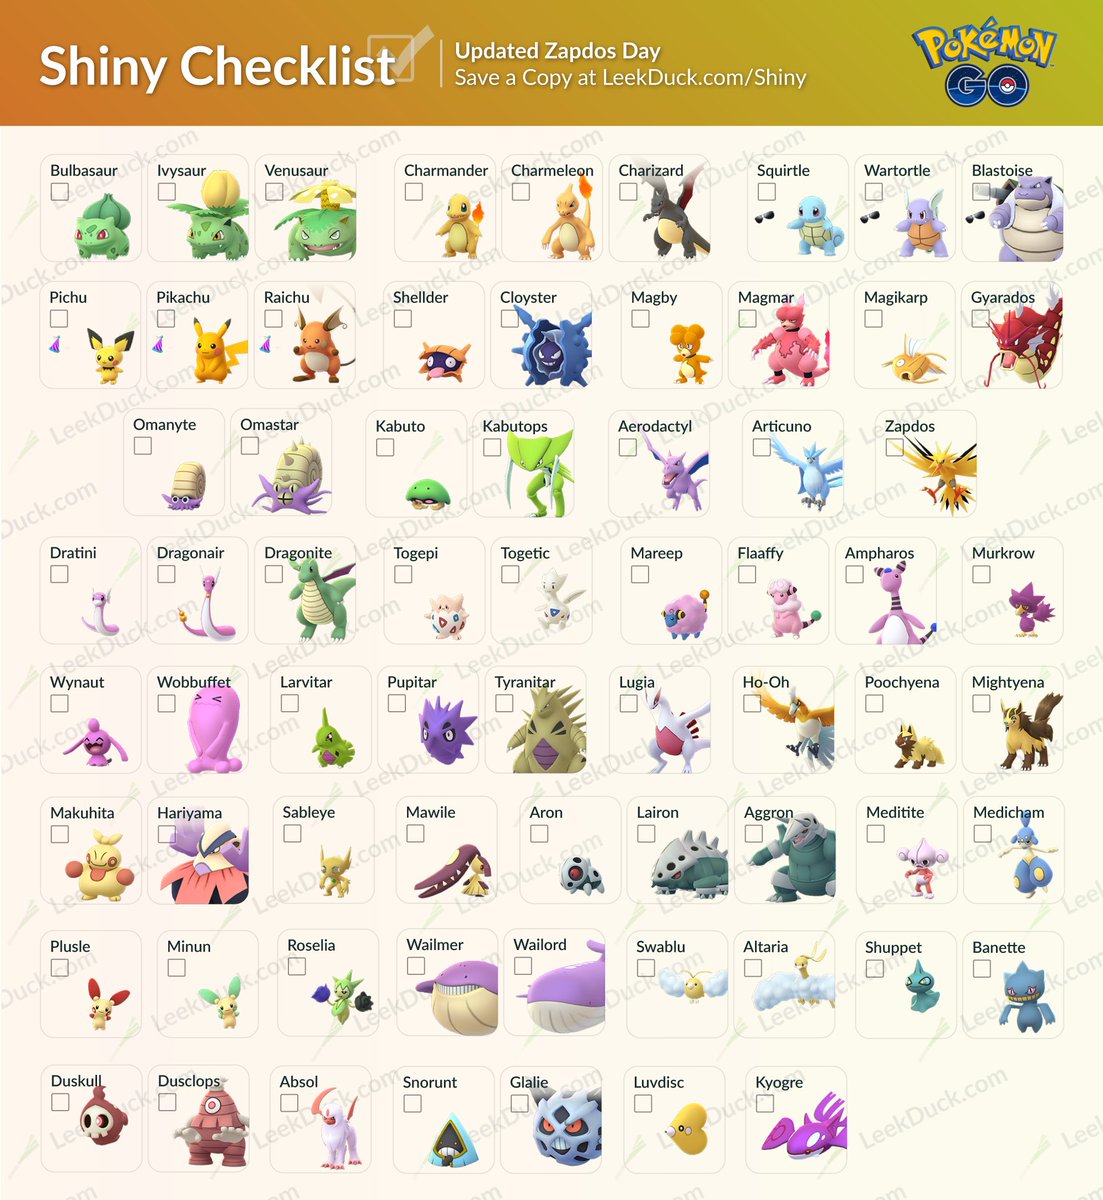 Leek Duck Nyc Shiny Checklist Updated With Zapdos Save A Copy At T Co 7tuyquv6zf